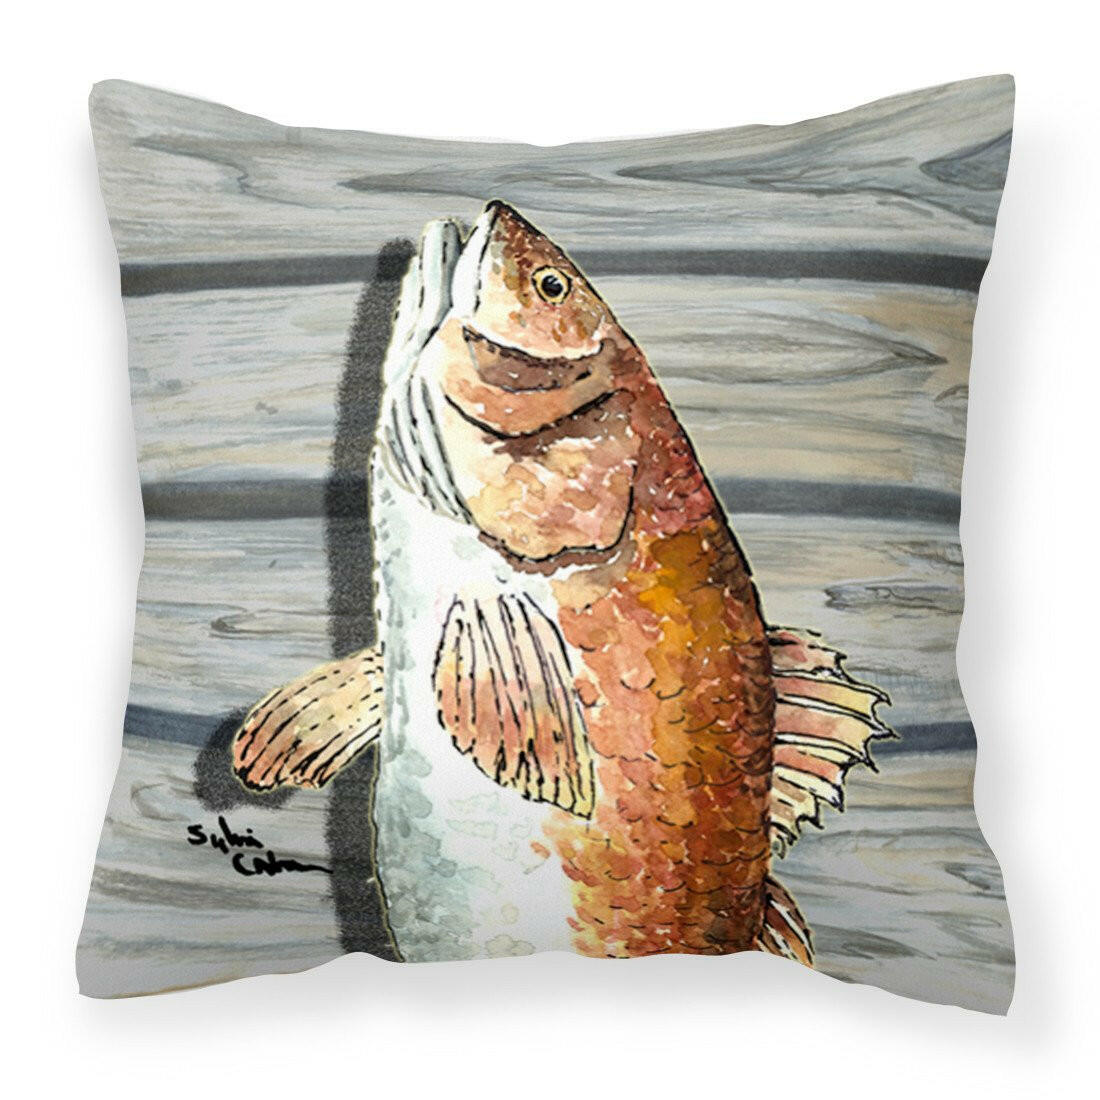 Red Fish Fabric Decorative Pillow 8489PW1414 - the-store.com